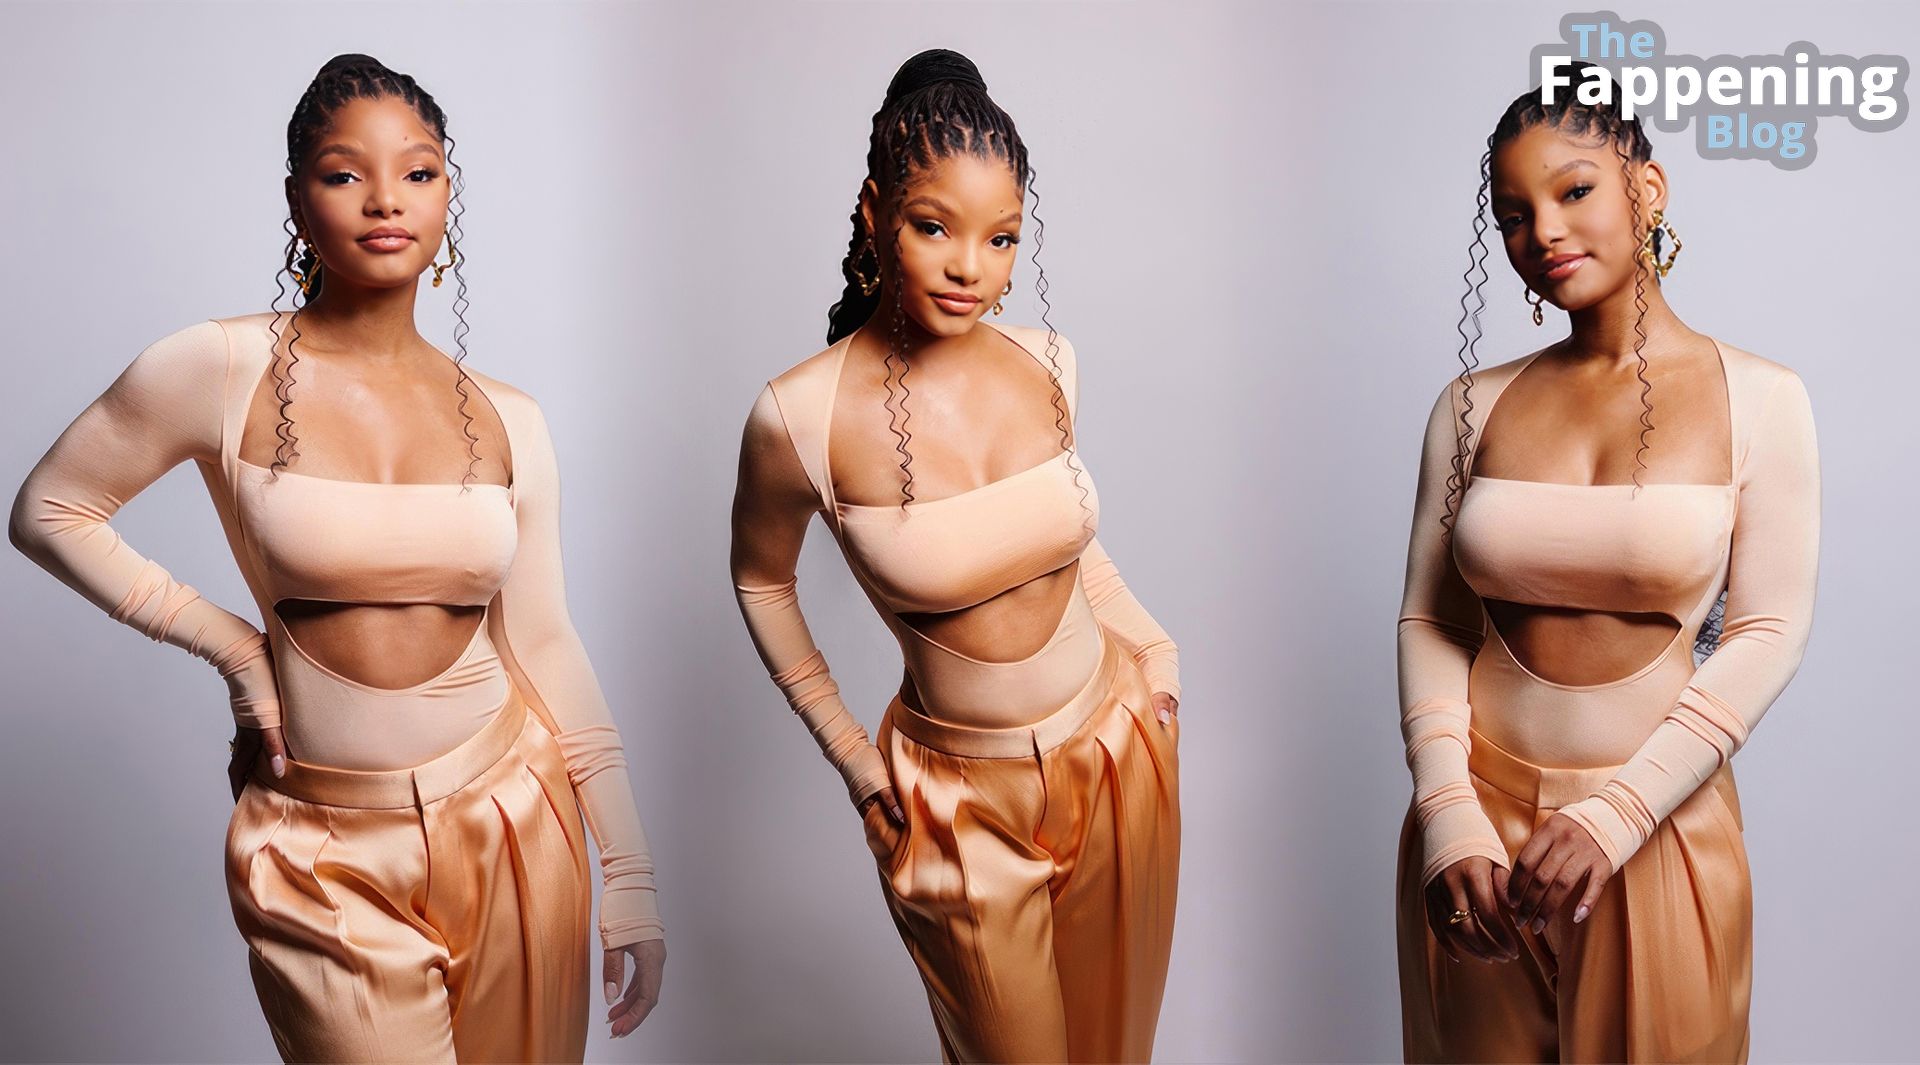 Halle Bailey Looks Hot in a New Shoot for KCA (5 Photos)